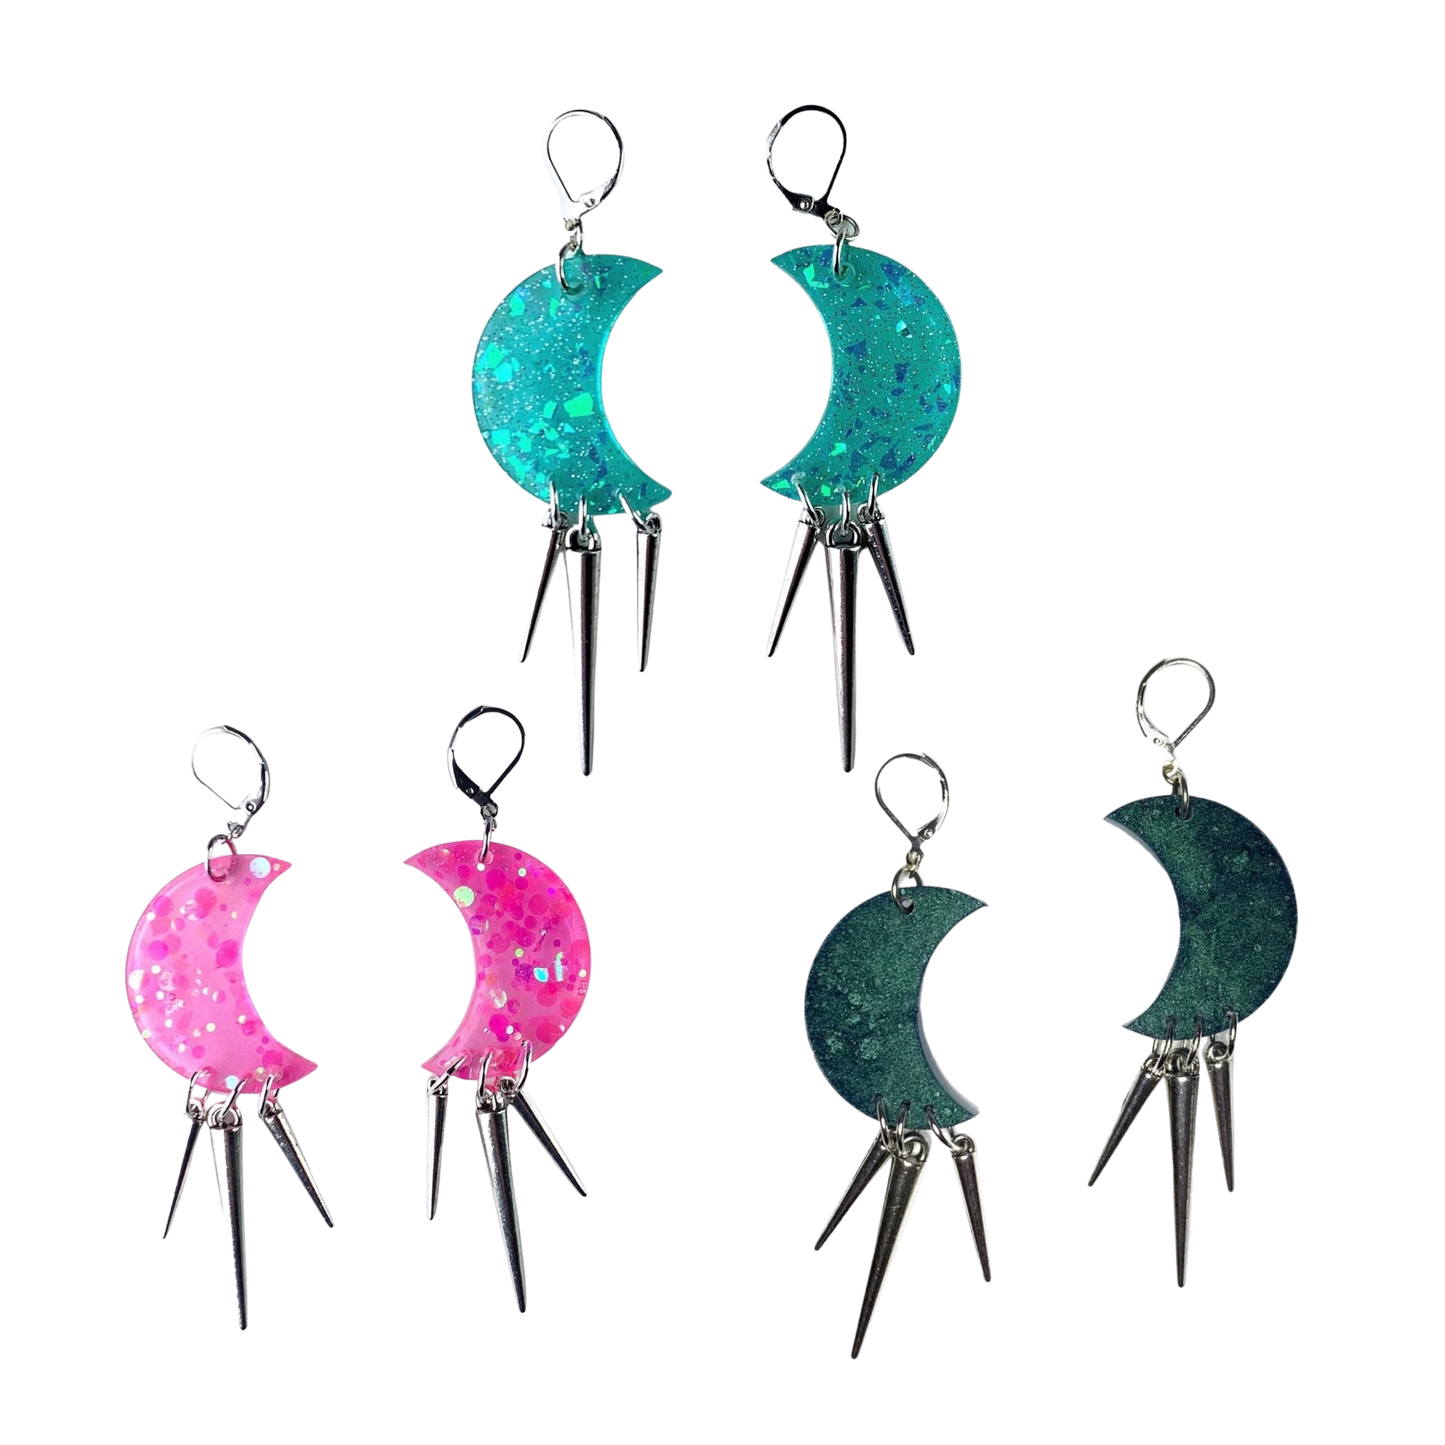 Metallic Green Moon Earrings with Spikes - Imperfect